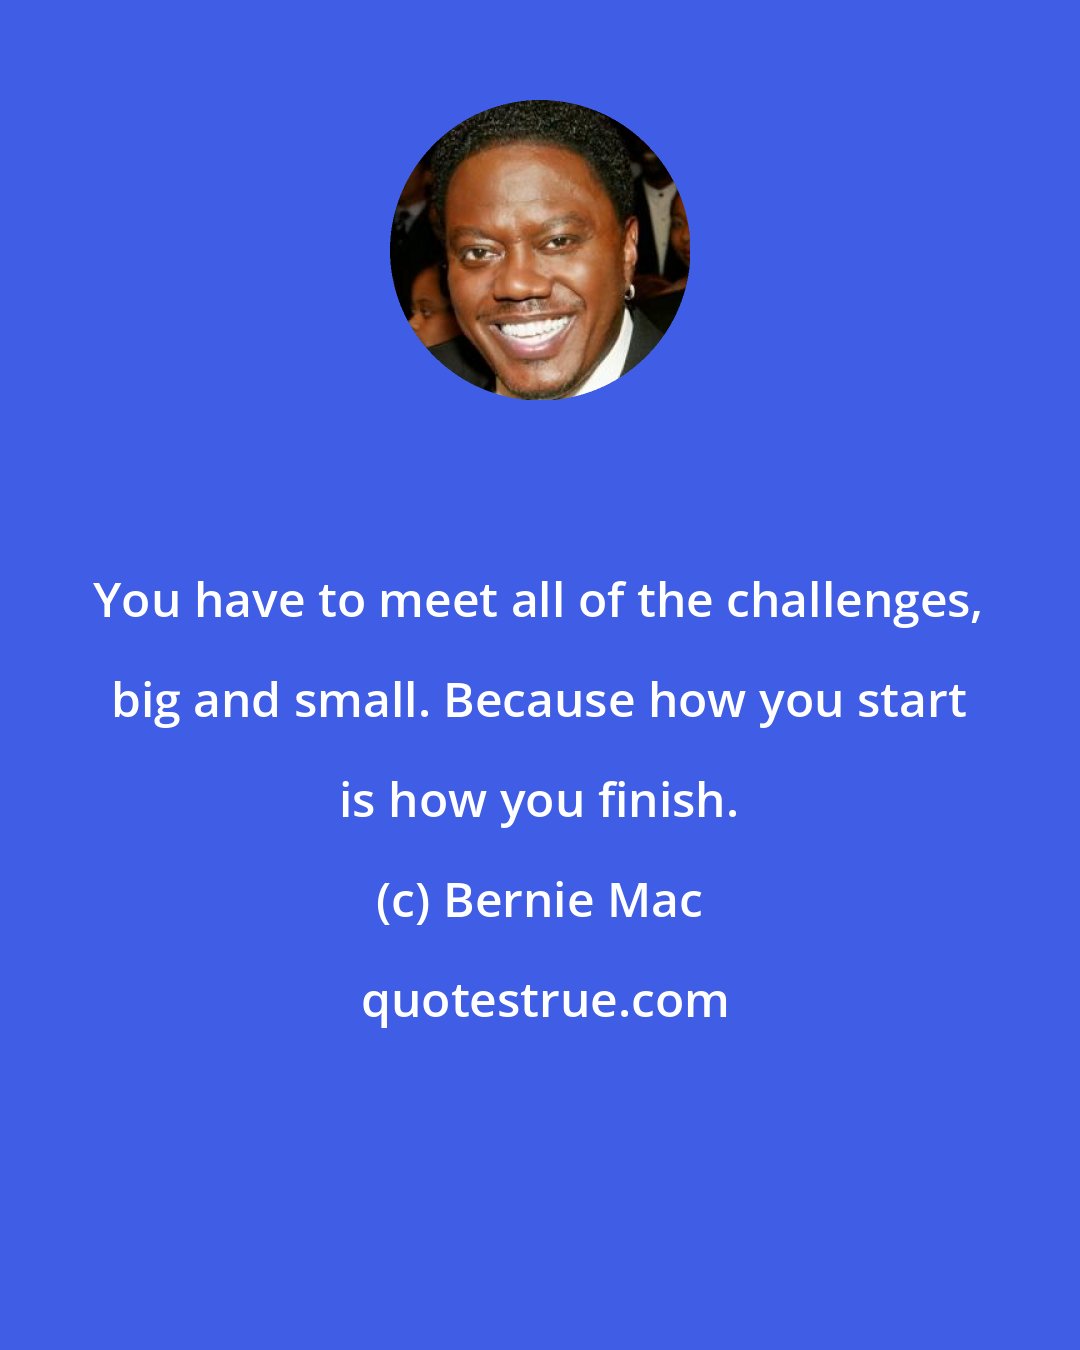 Bernie Mac: You have to meet all of the challenges, big and small. Because how you start is how you finish.